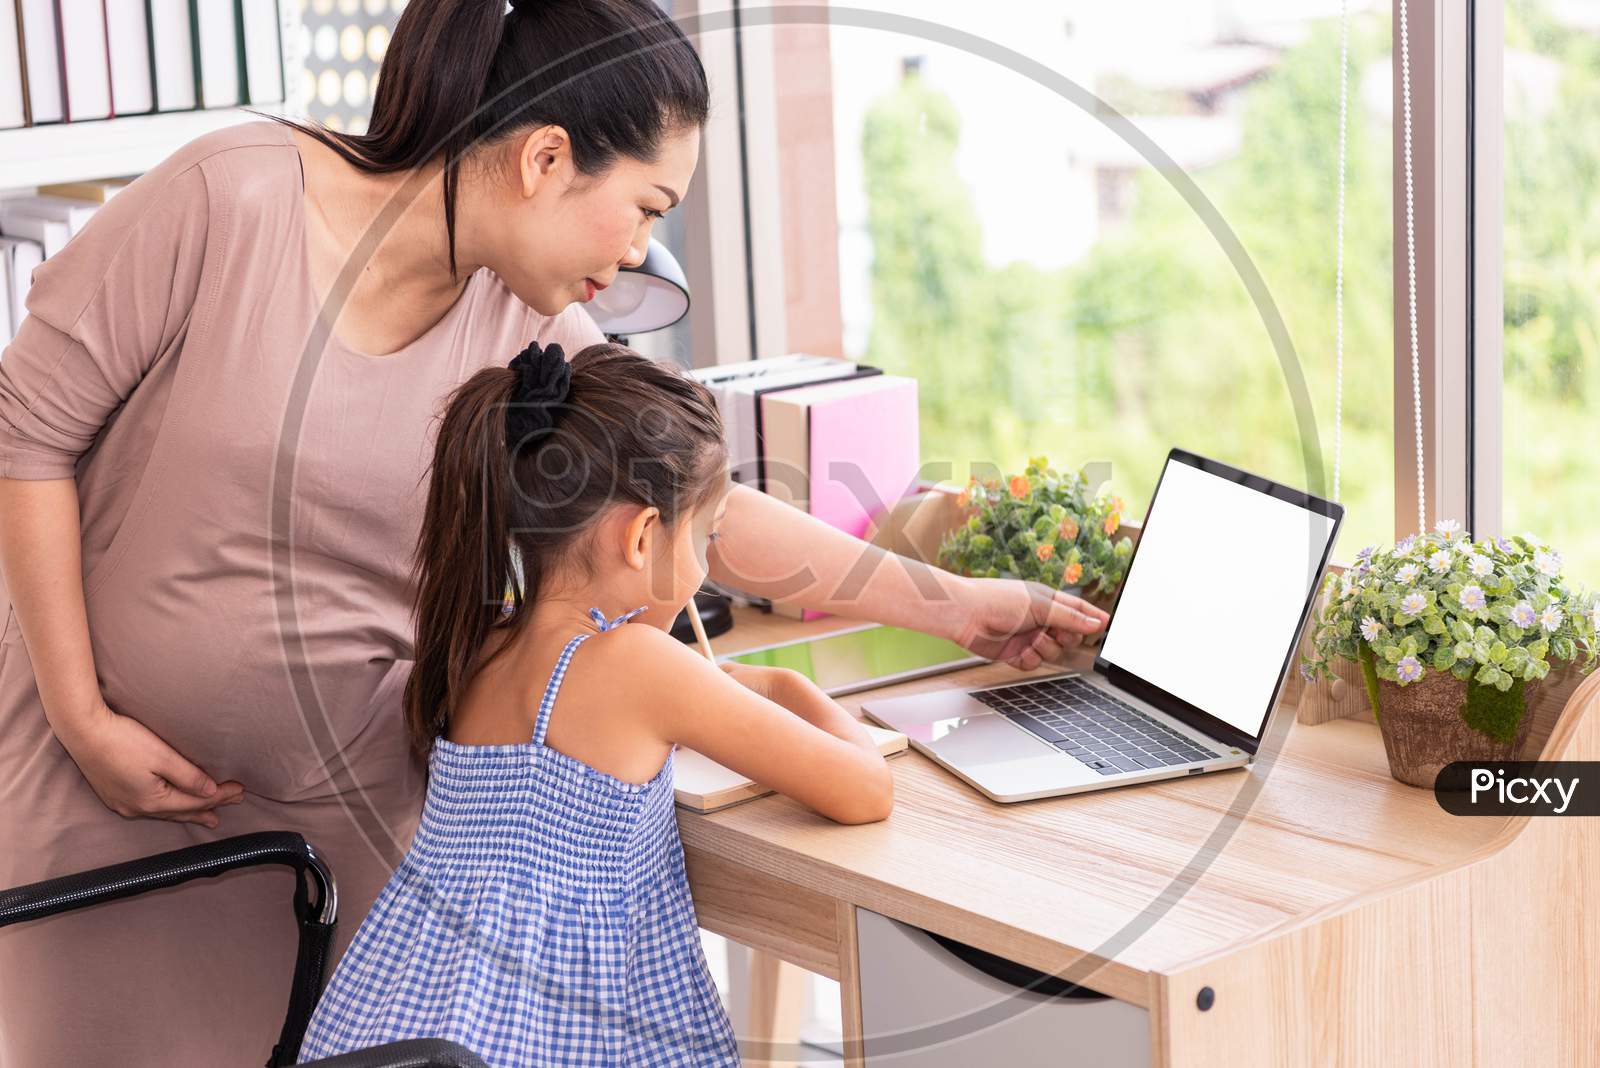 Cute Daughter And Her Pregnant Mother Using White Blank Screen Laptop At Home. Parenthood And Technology. Health And Medical. People Lifestyles And Family Concept. Copy Space